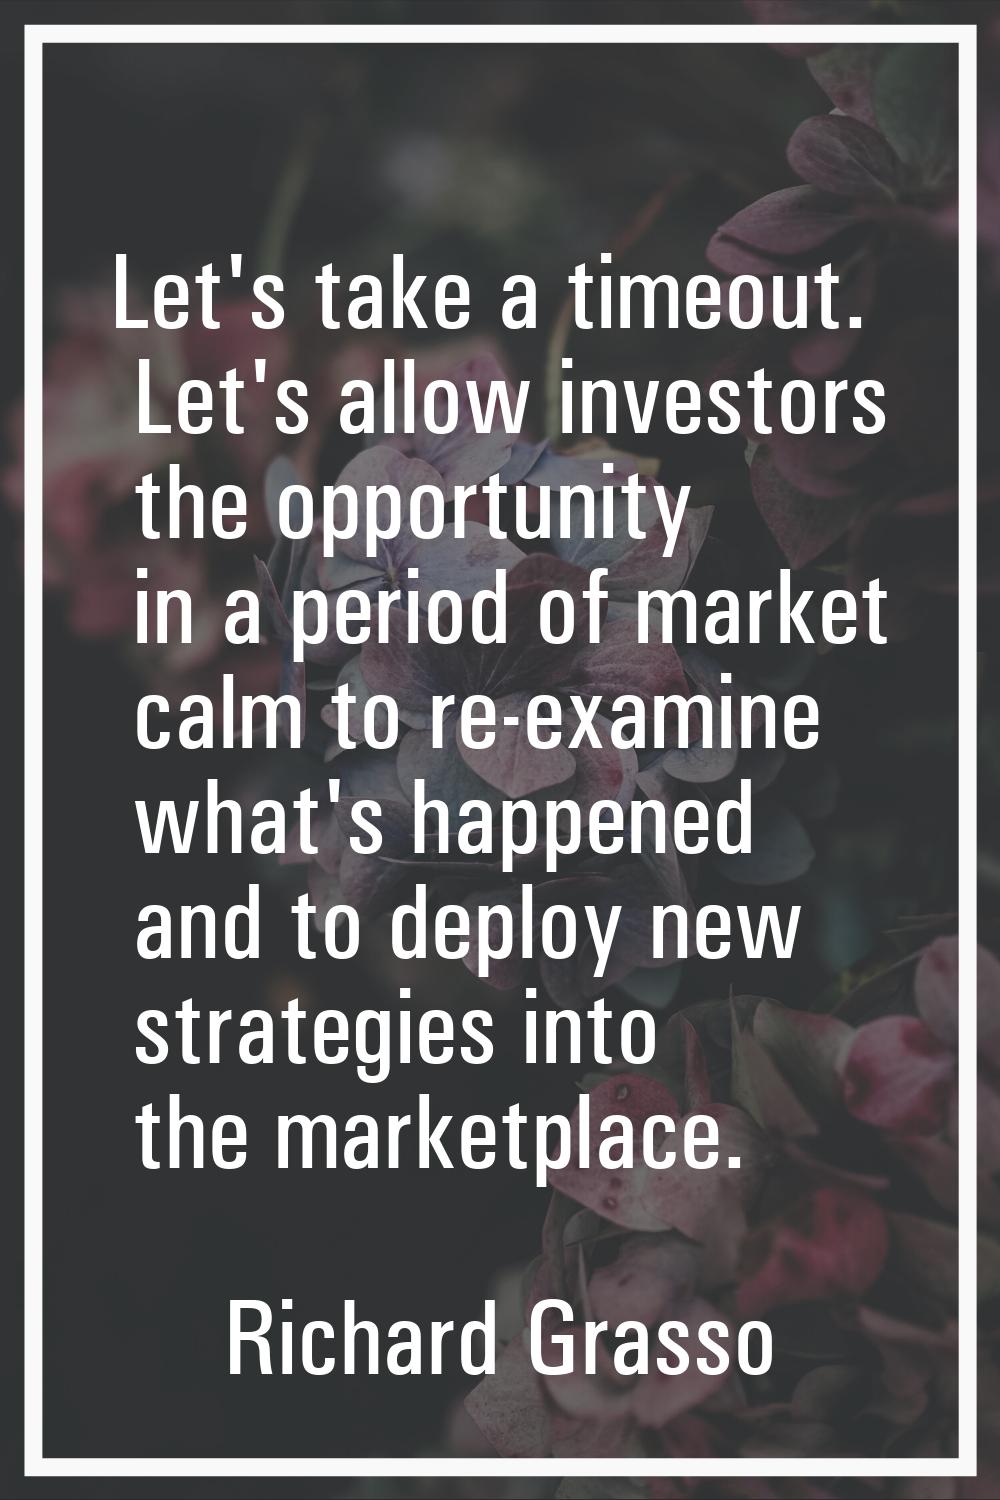 Let's take a timeout. Let's allow investors the opportunity in a period of market calm to re-examin